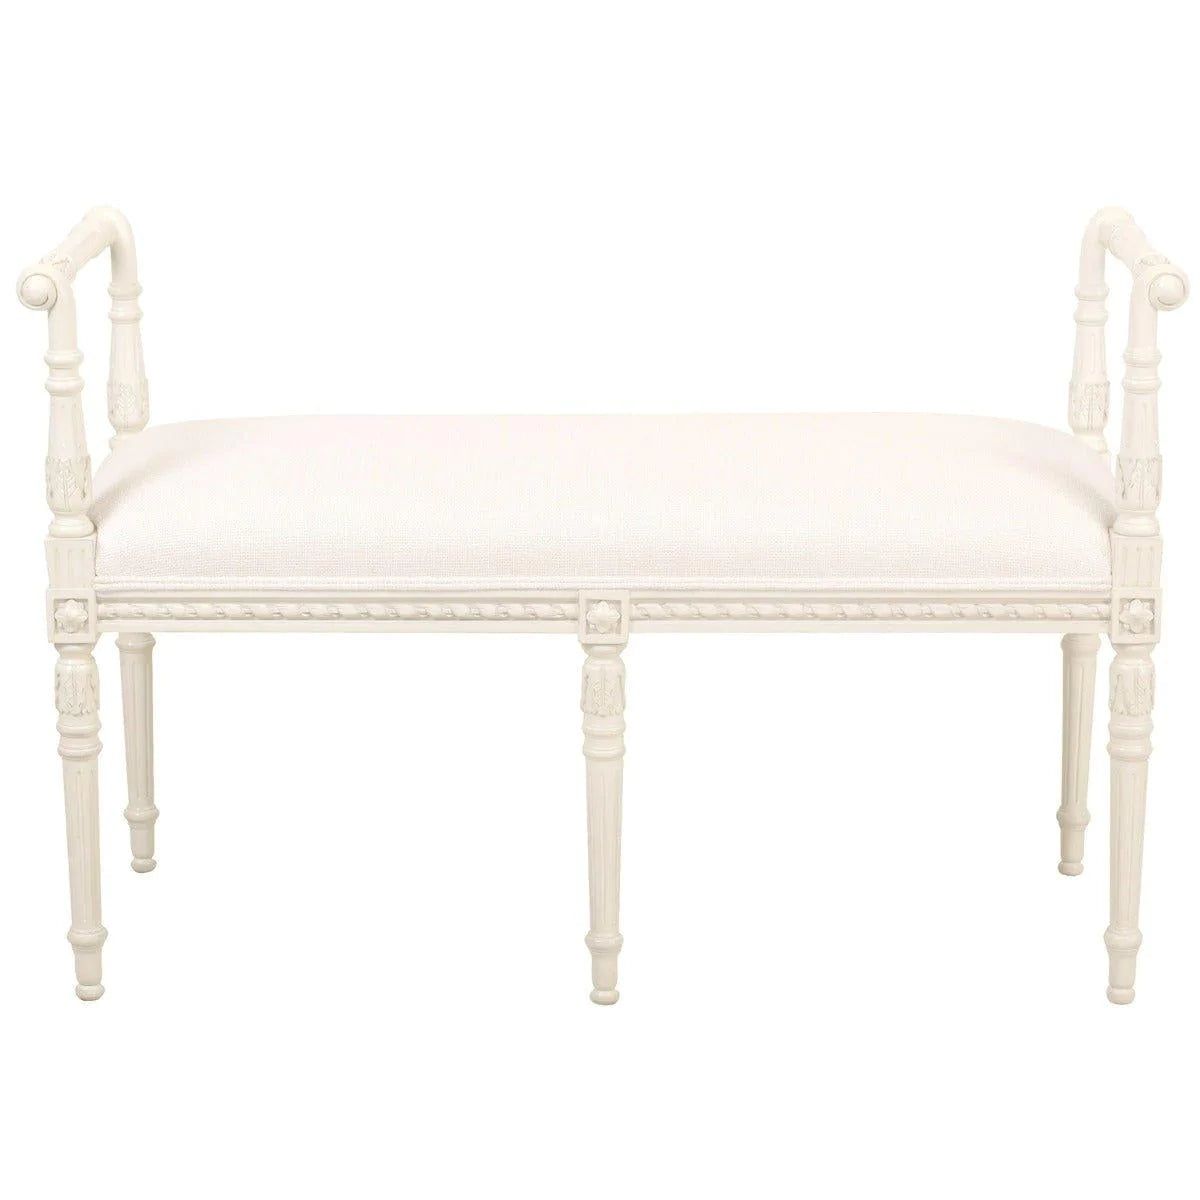 Handmade French Alina Cream Bench with Upholstered Seat | The Well Appointed House, LLC